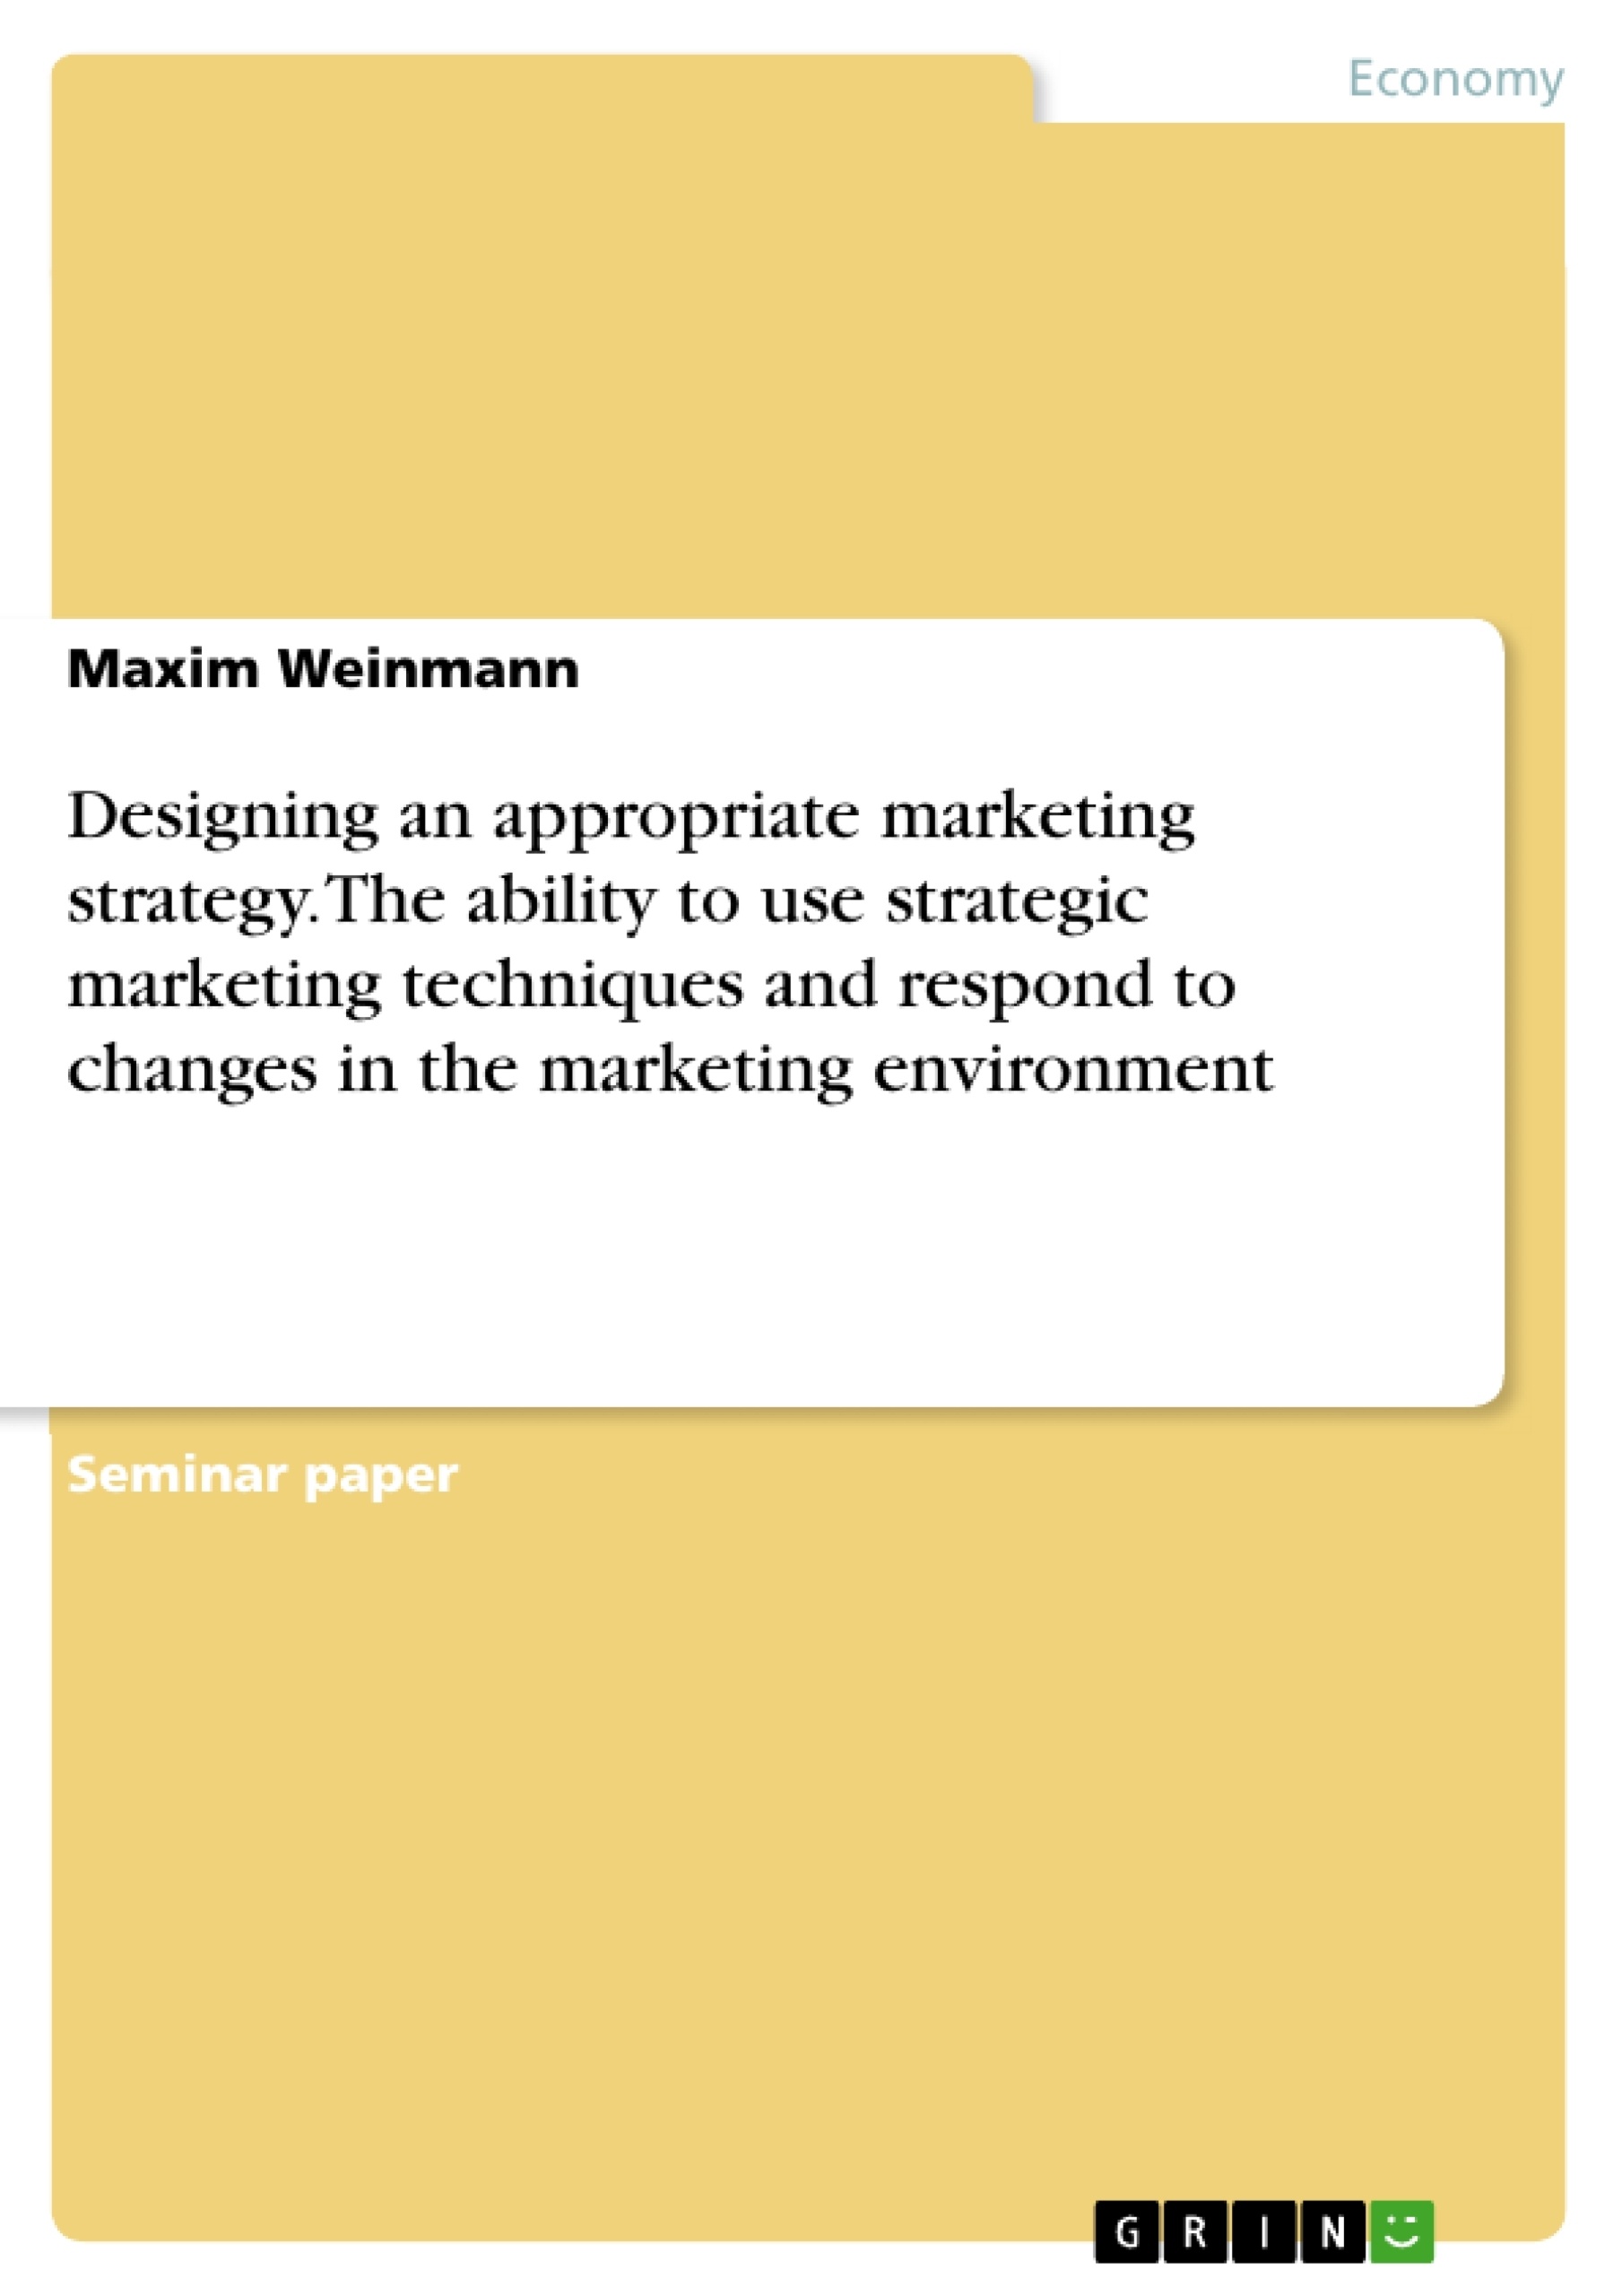 Title: Designing an appropriate marketing strategy. The ability to use strategic marketing techniques and respond to changes in the marketing environment